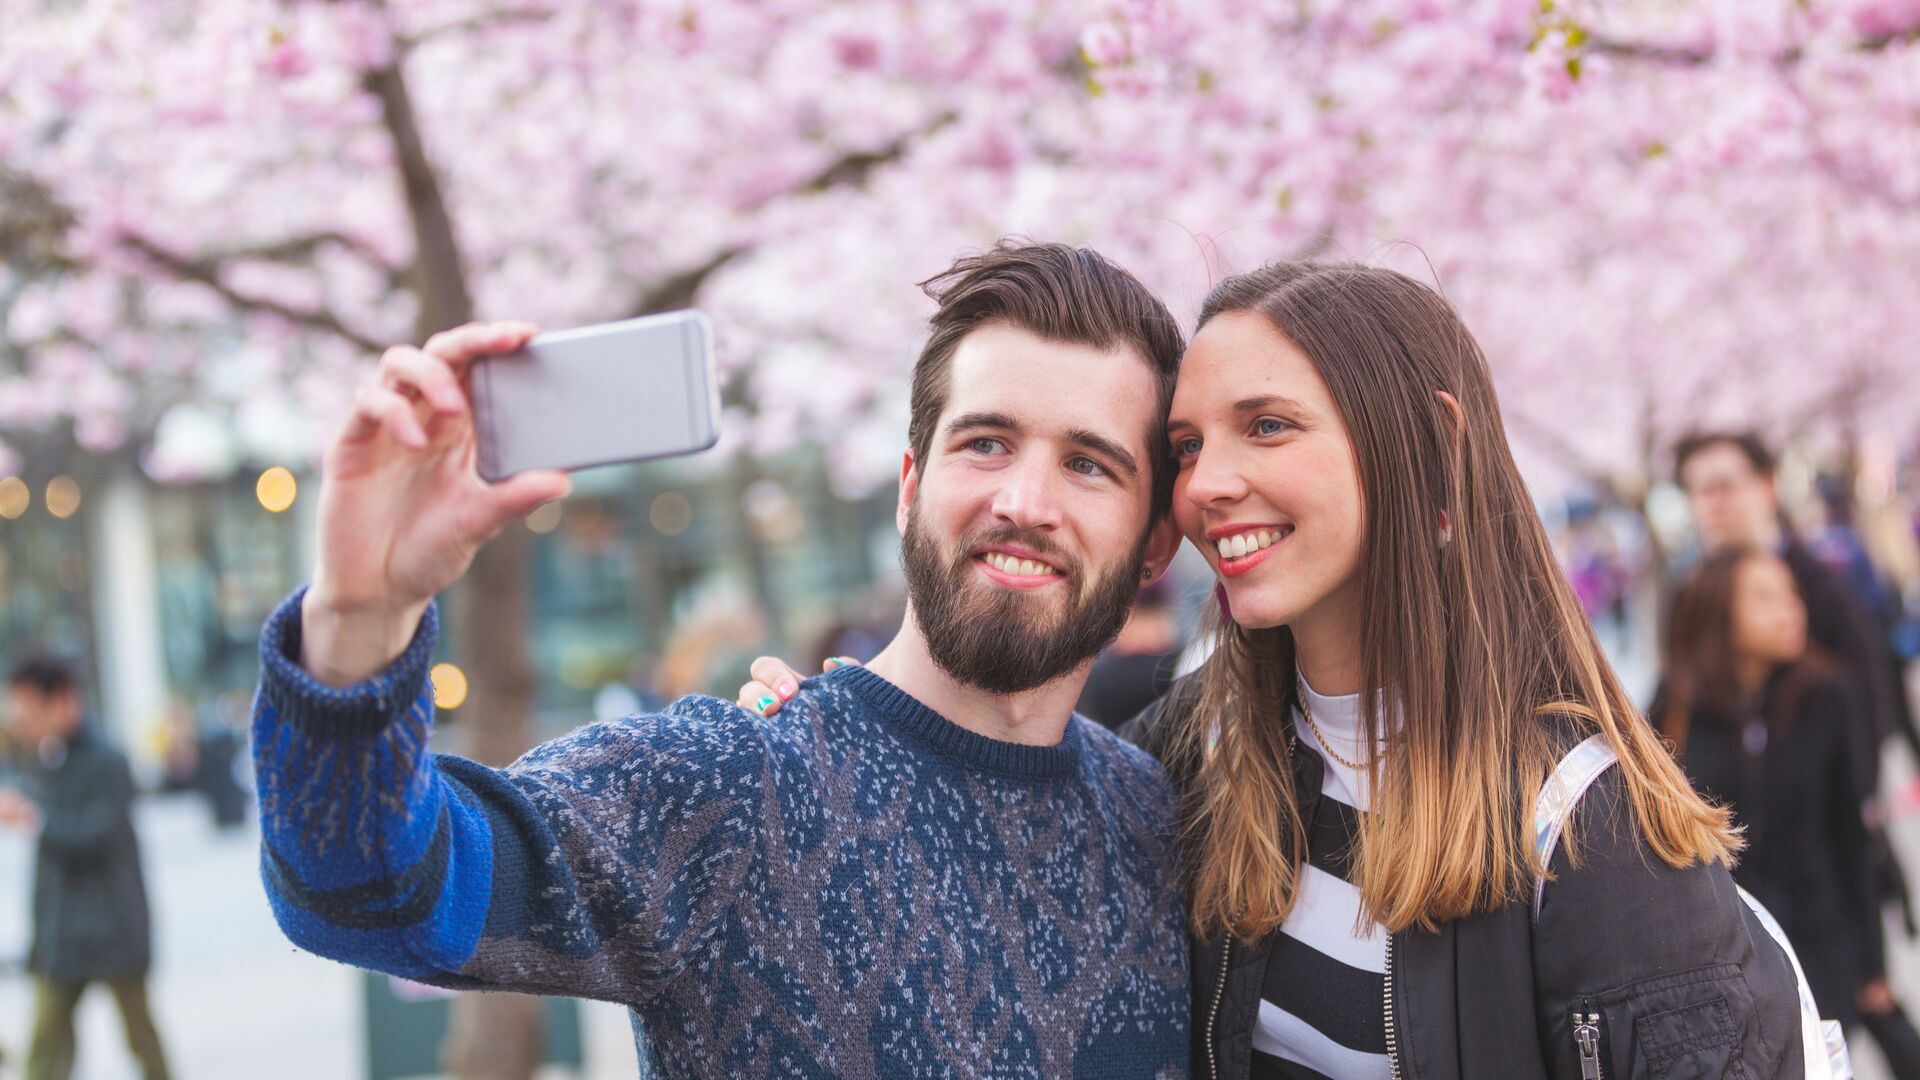 Man and woman taking a selfie 